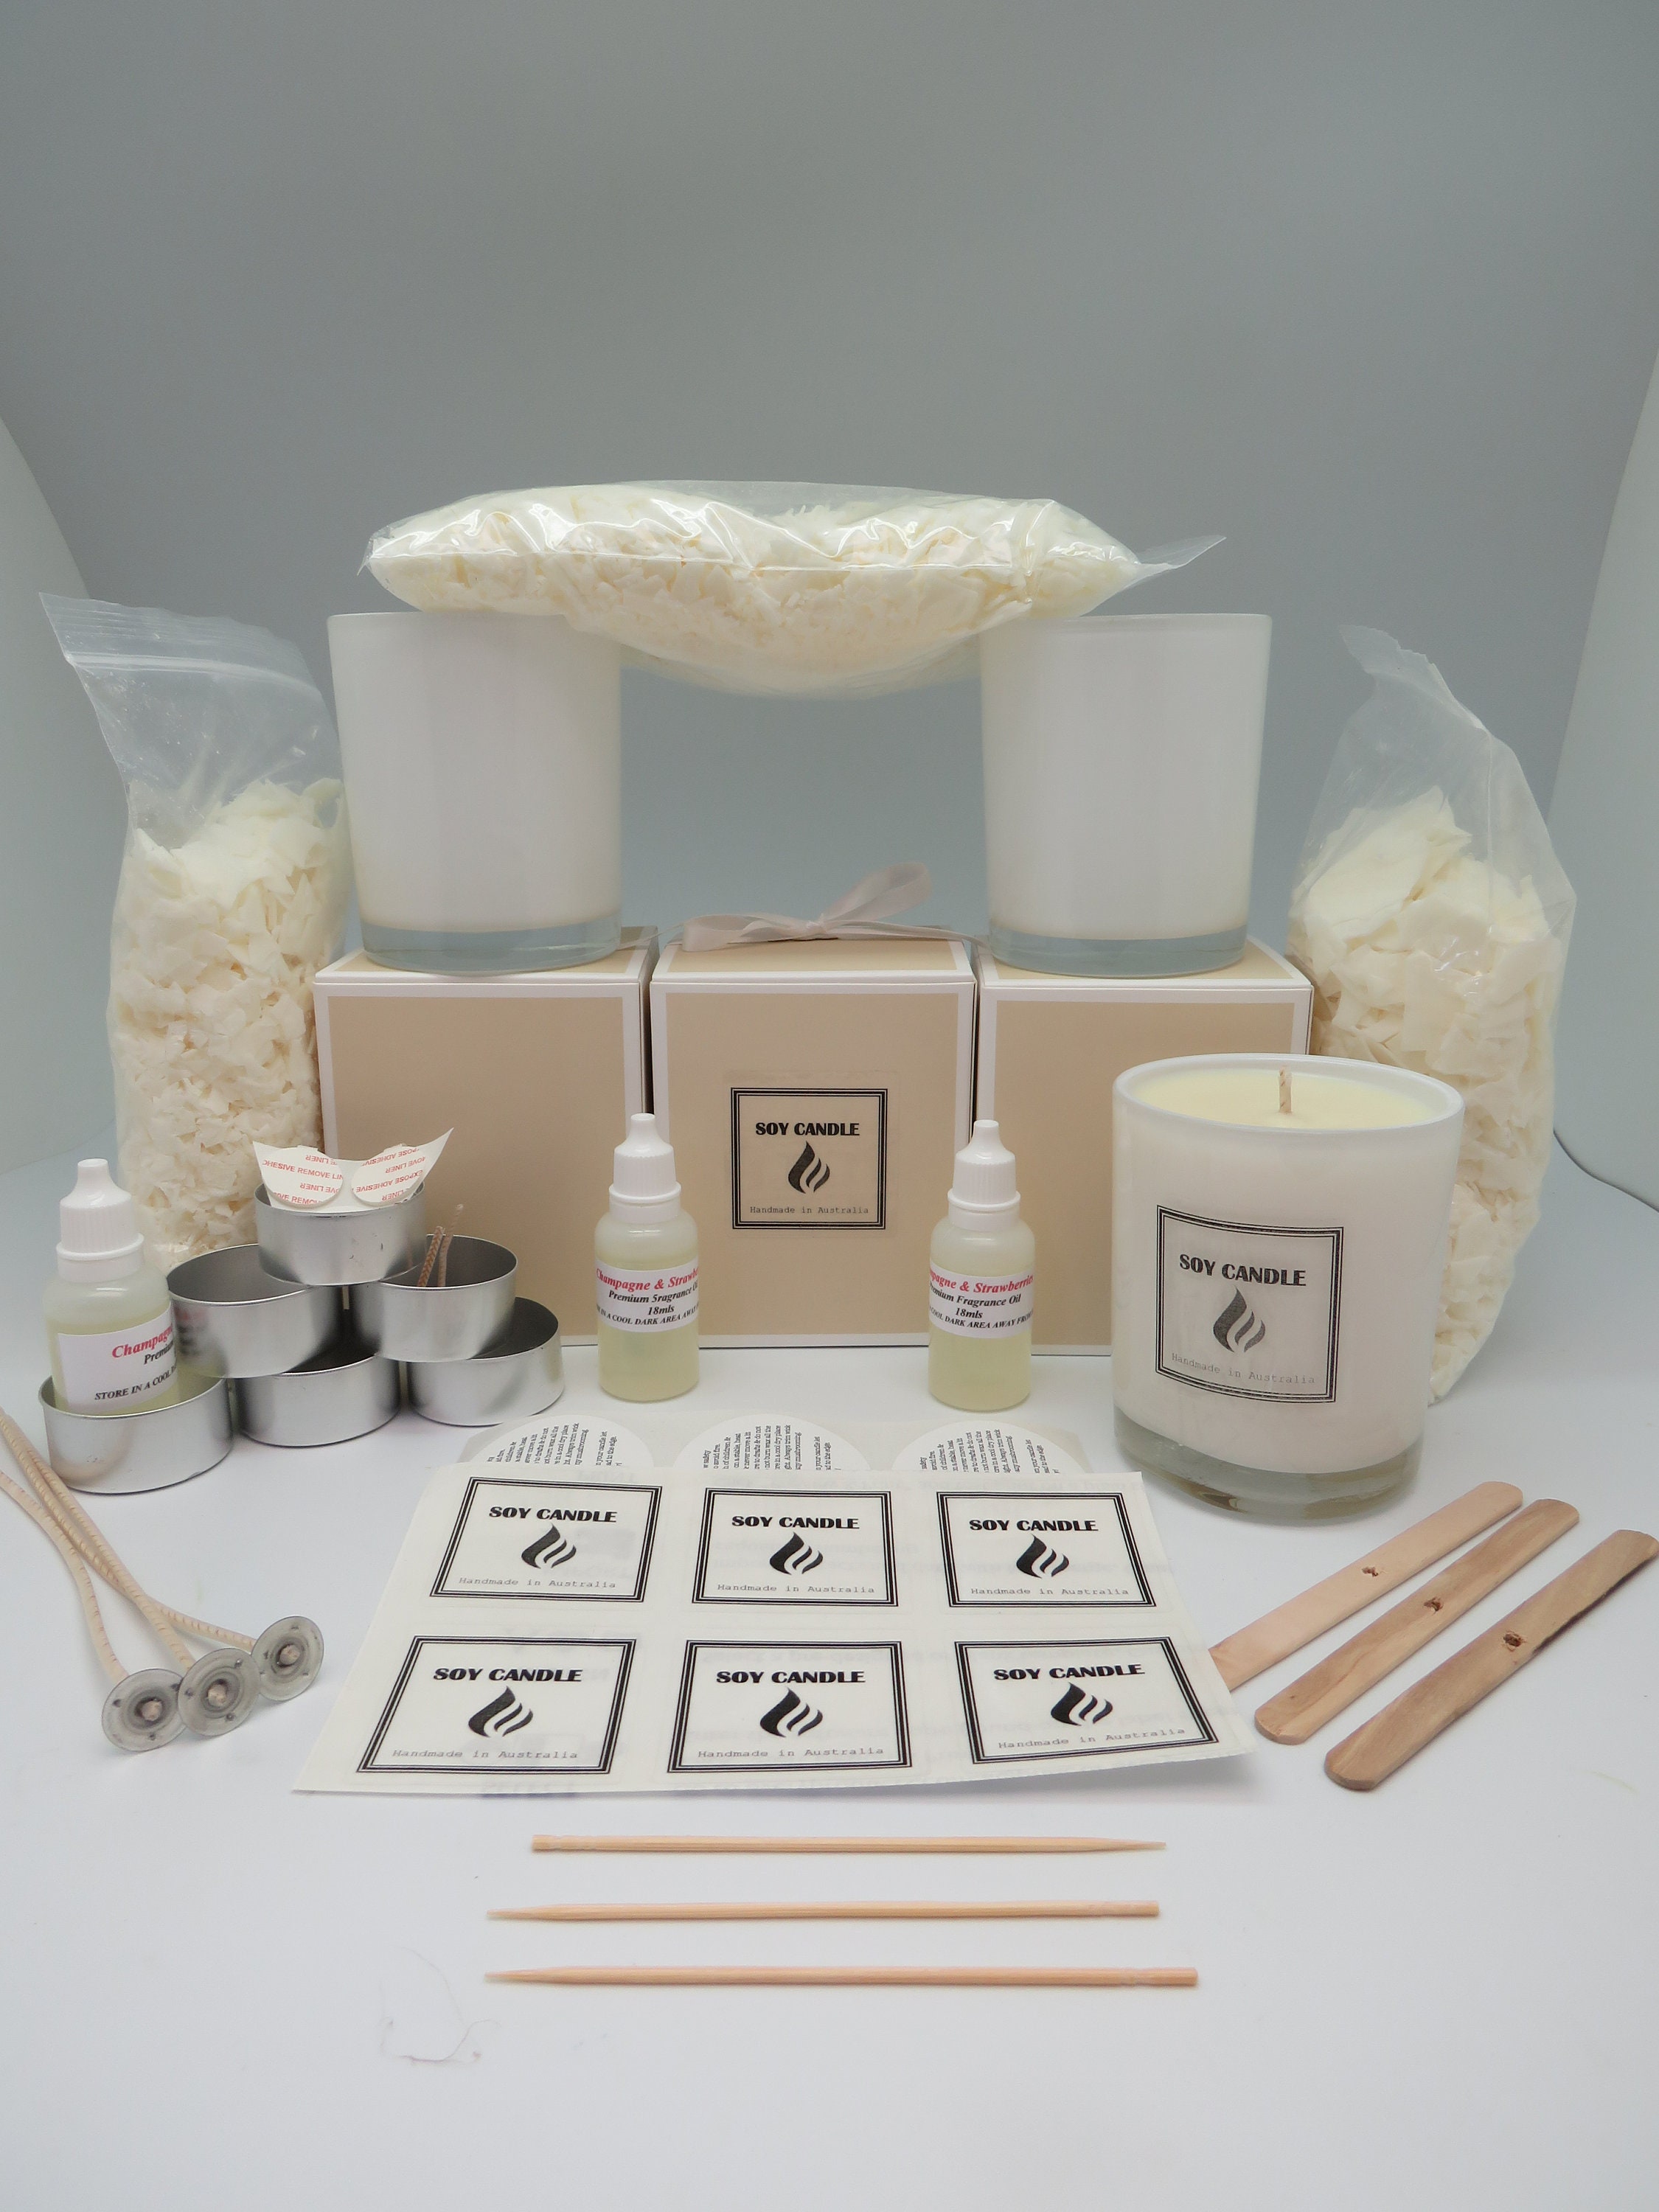 Candle Making Kit for Diy/gift, Full Candle Making Supplies for